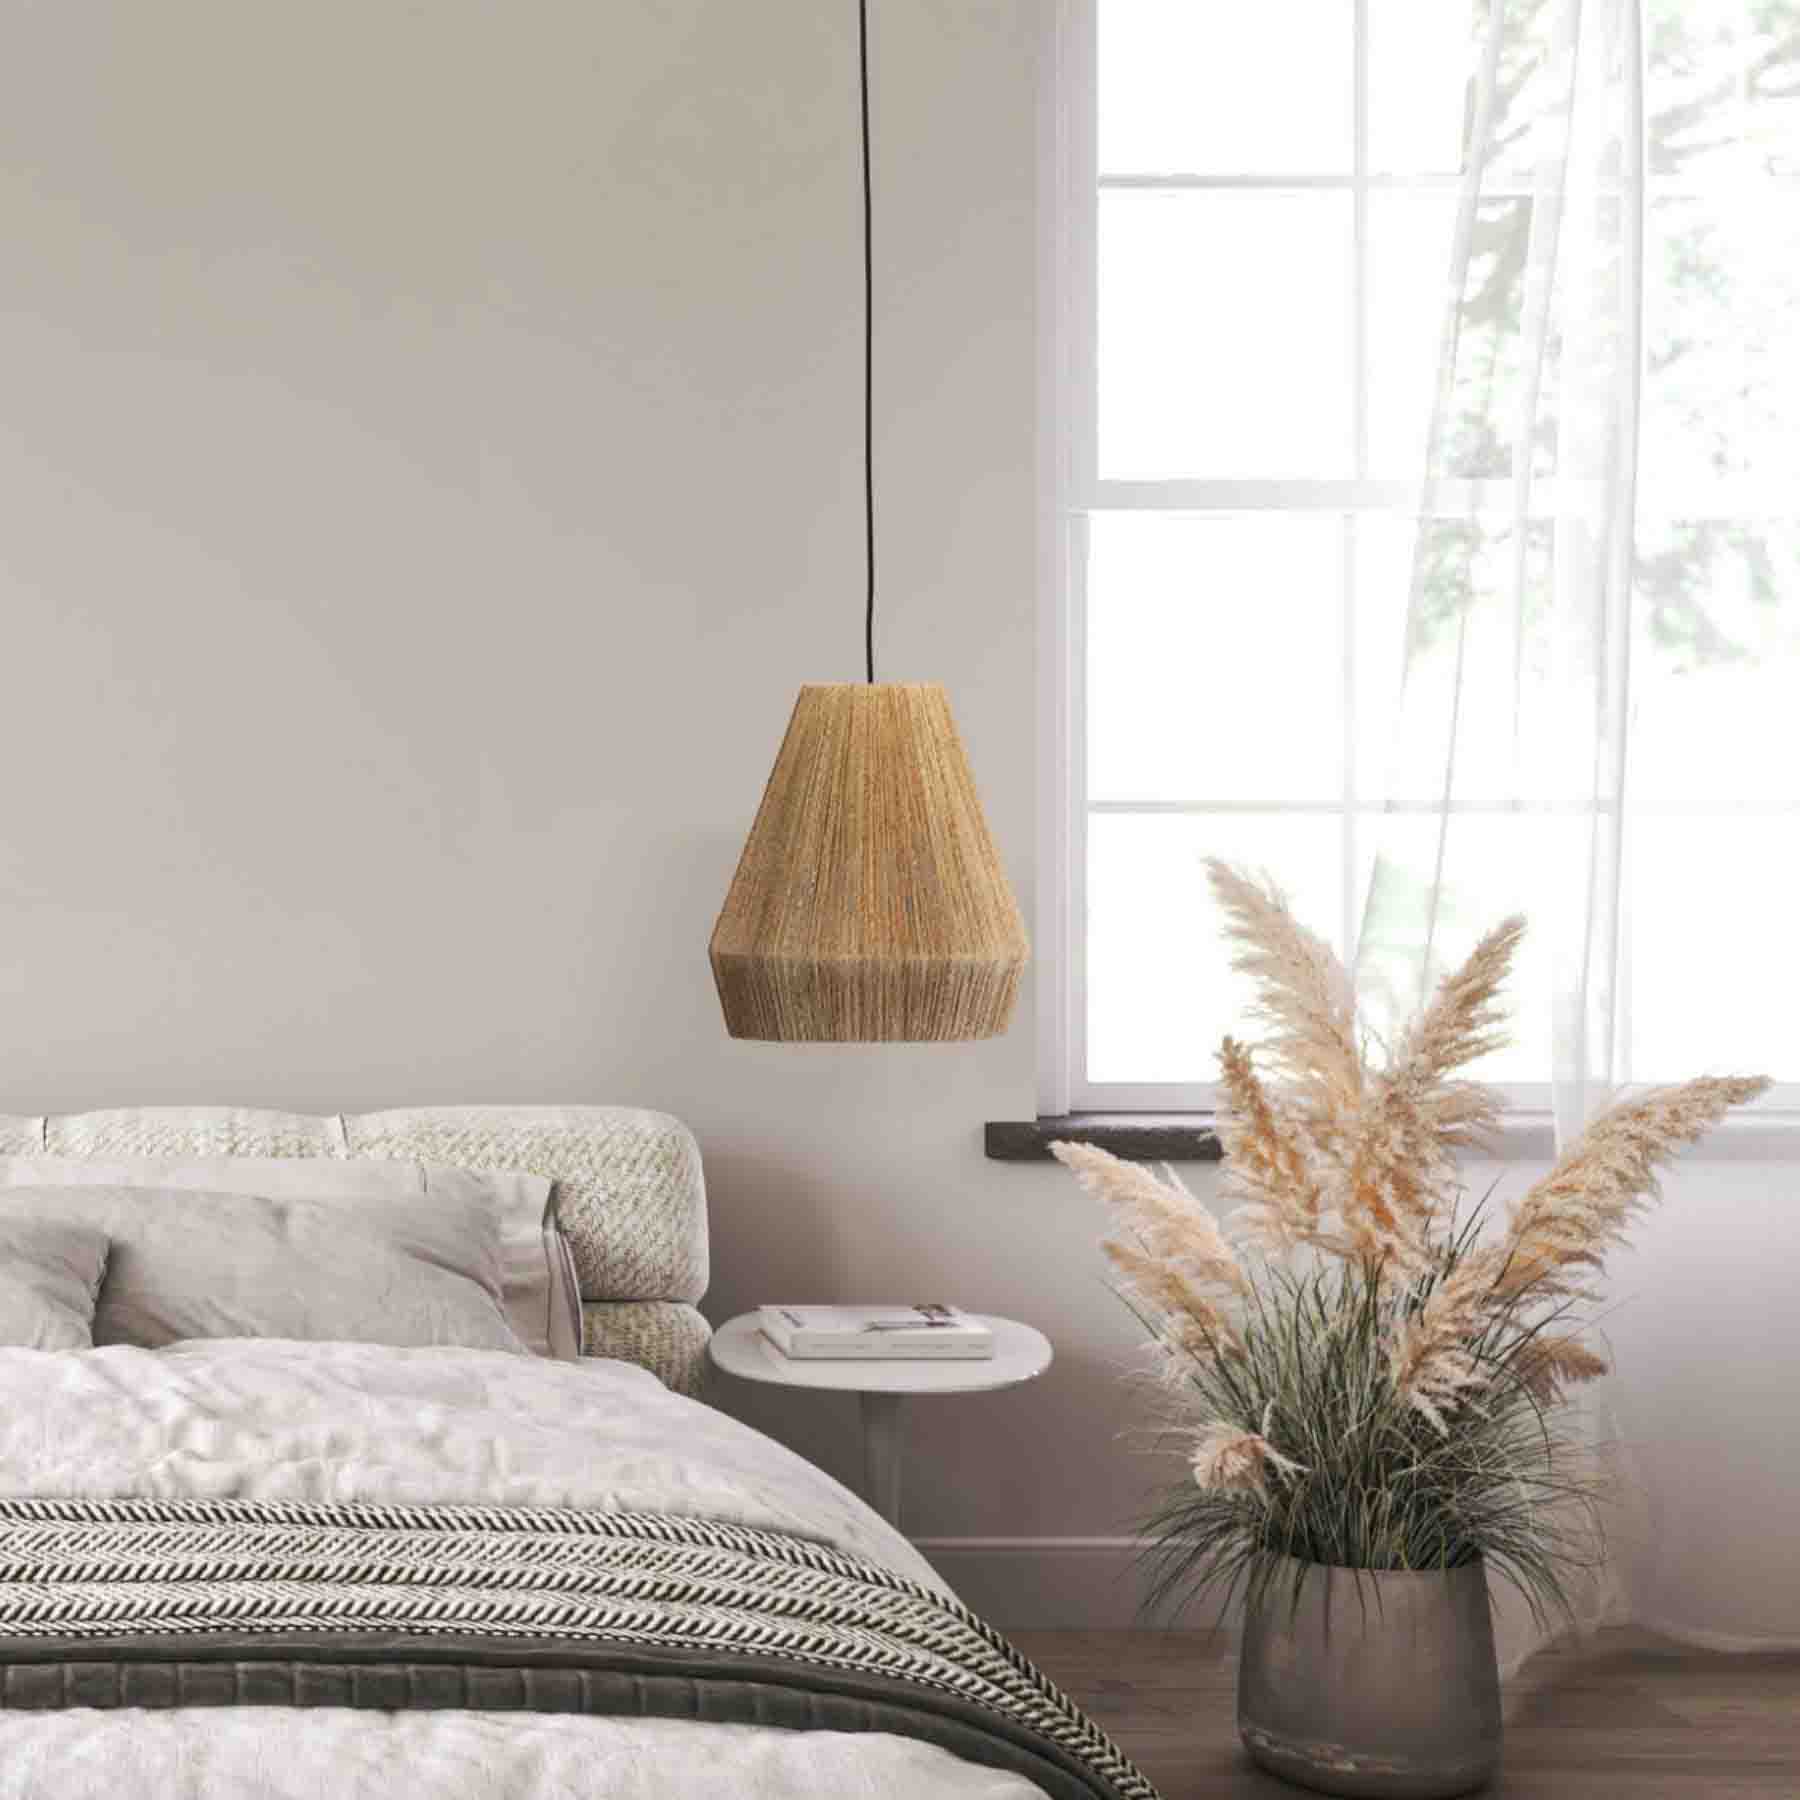 the design of the collins pendant light is perfect for the bedroom